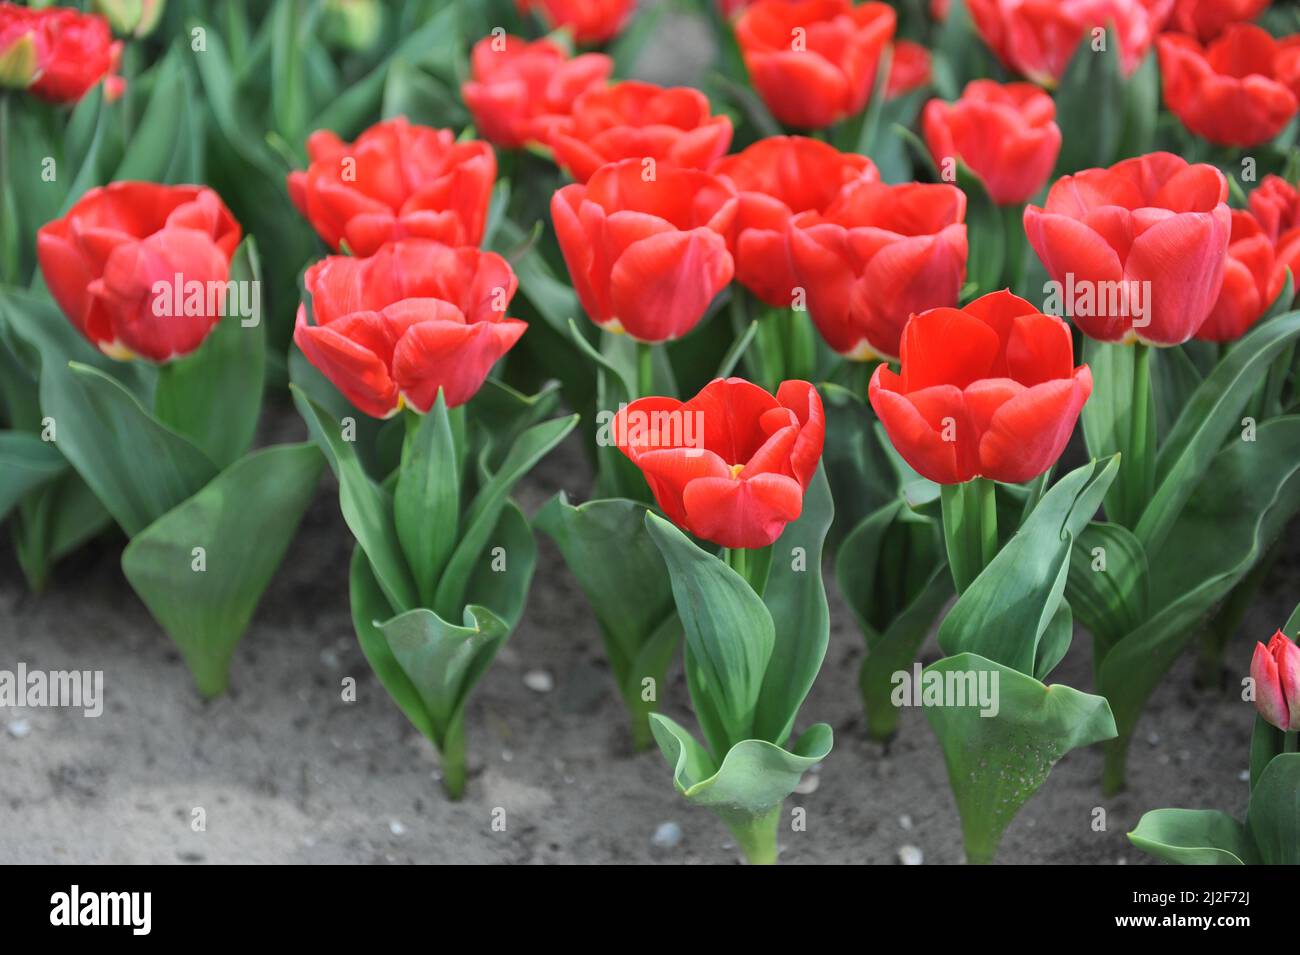 Red Triumph tulips (Tulipa) Calgary Red bloom in a garden in March Stock Photo